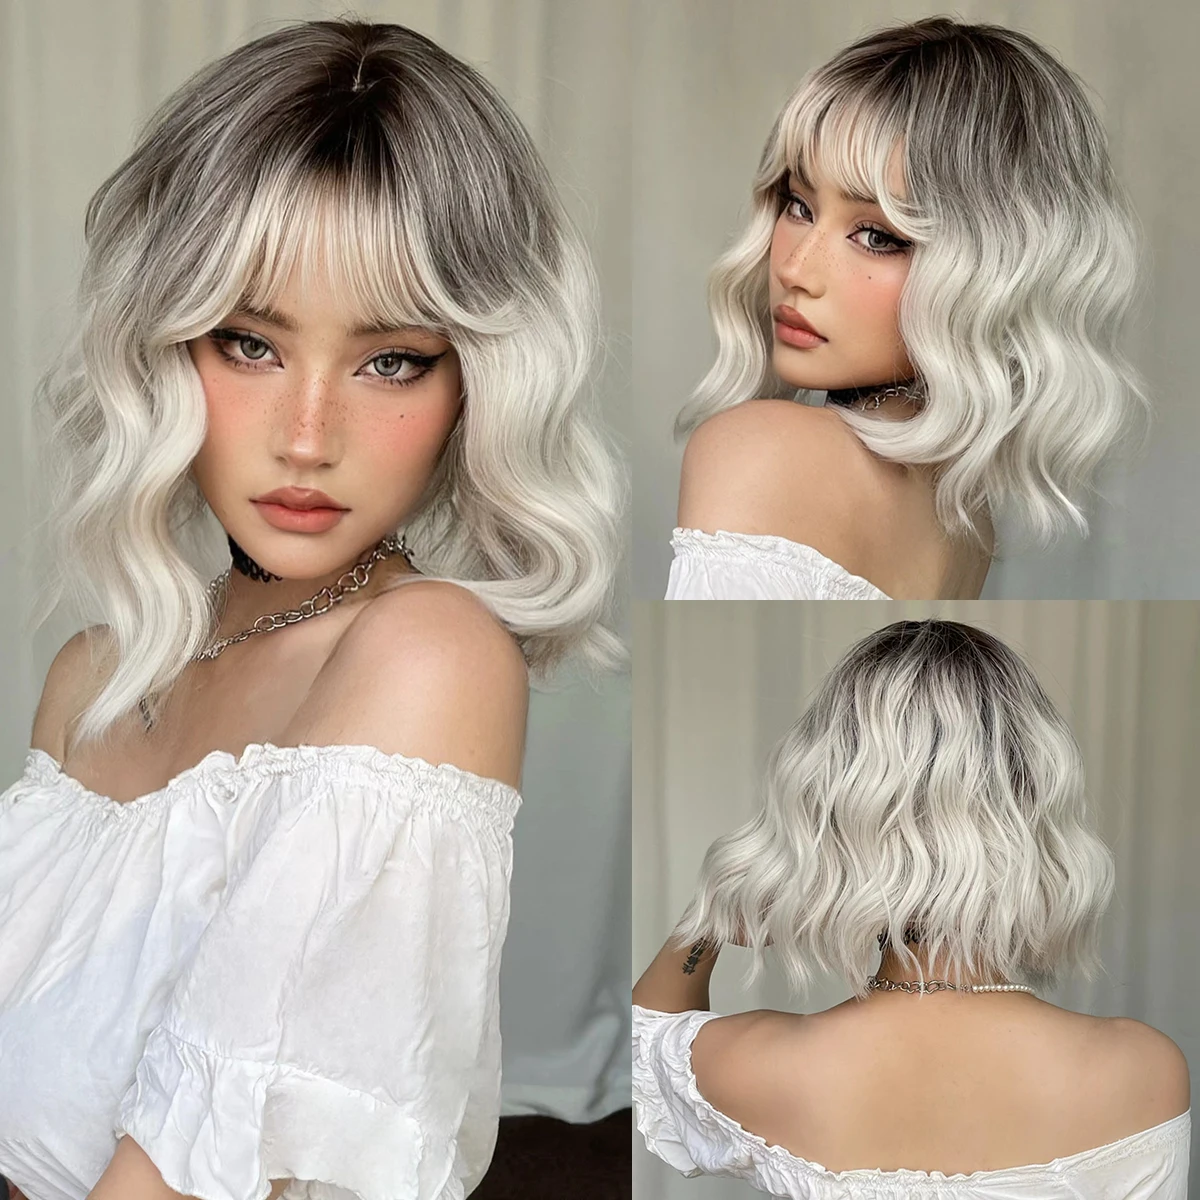 

SNQP Short Curly Wig with Bangs New Stylish Hair Wig for Women Daily Cosplay Party Heat Resistant Natural Looking Purple Wig